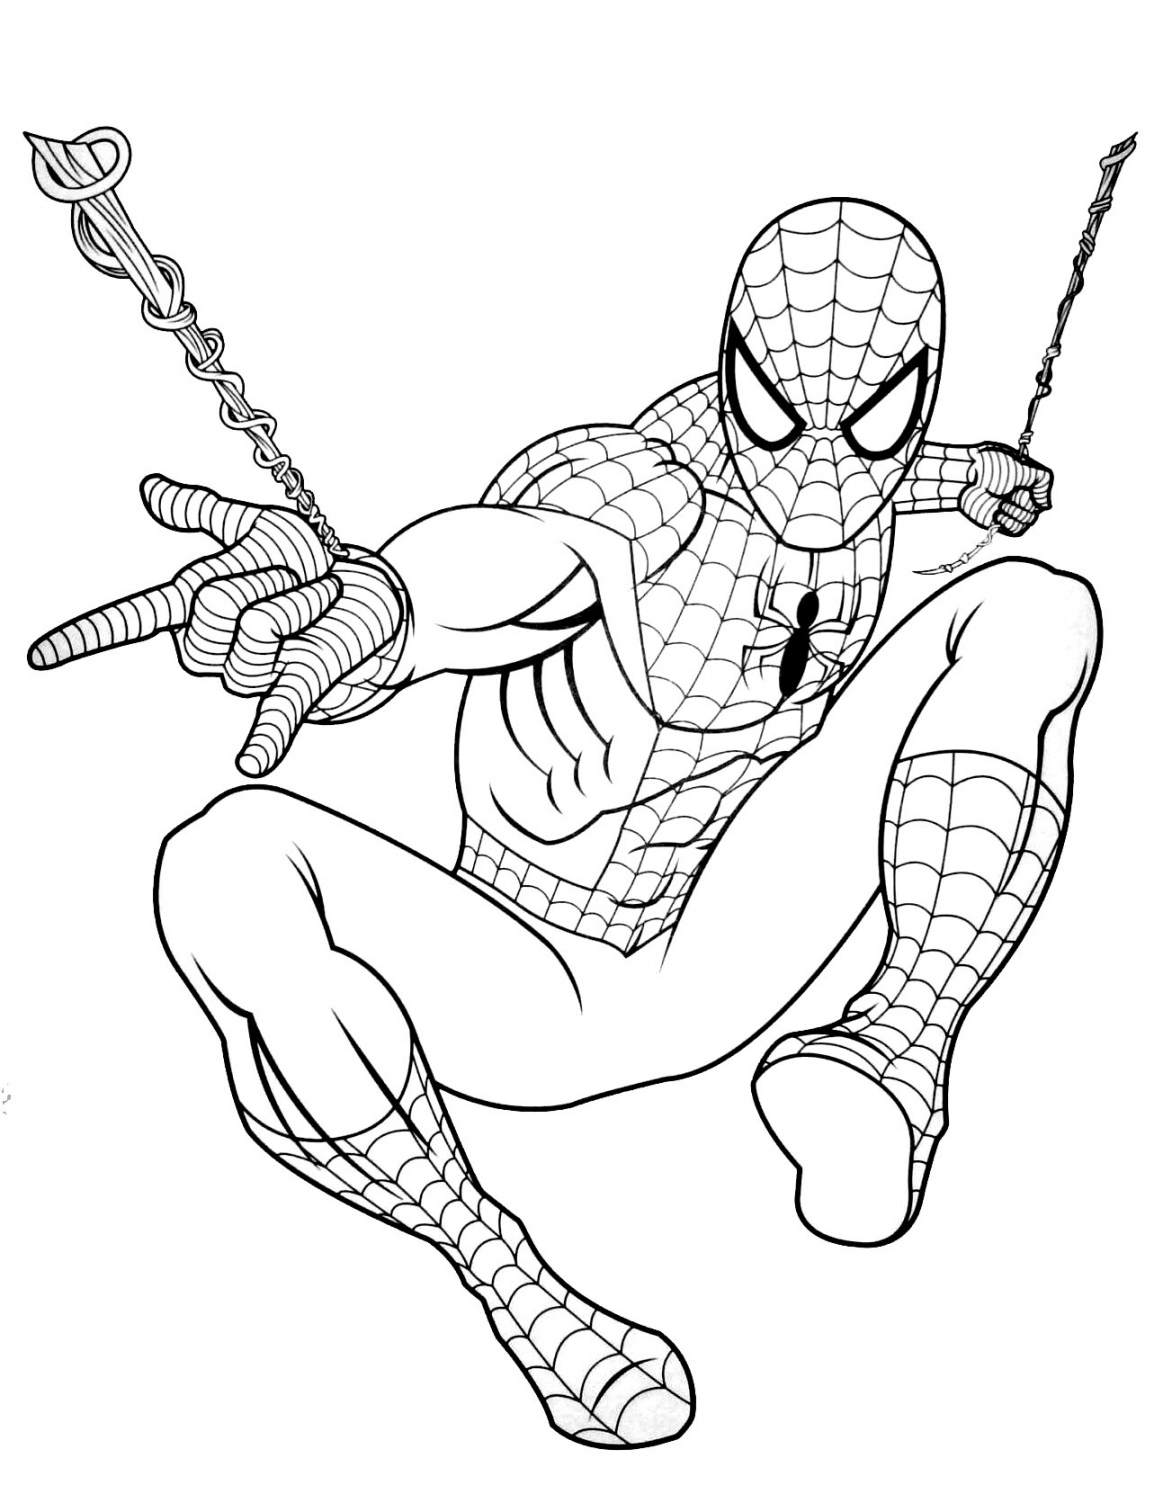 Free Printable Coloring Pages of Spiderman - Printable - Free Spiderman drawing to print and color - Spiderman Kids